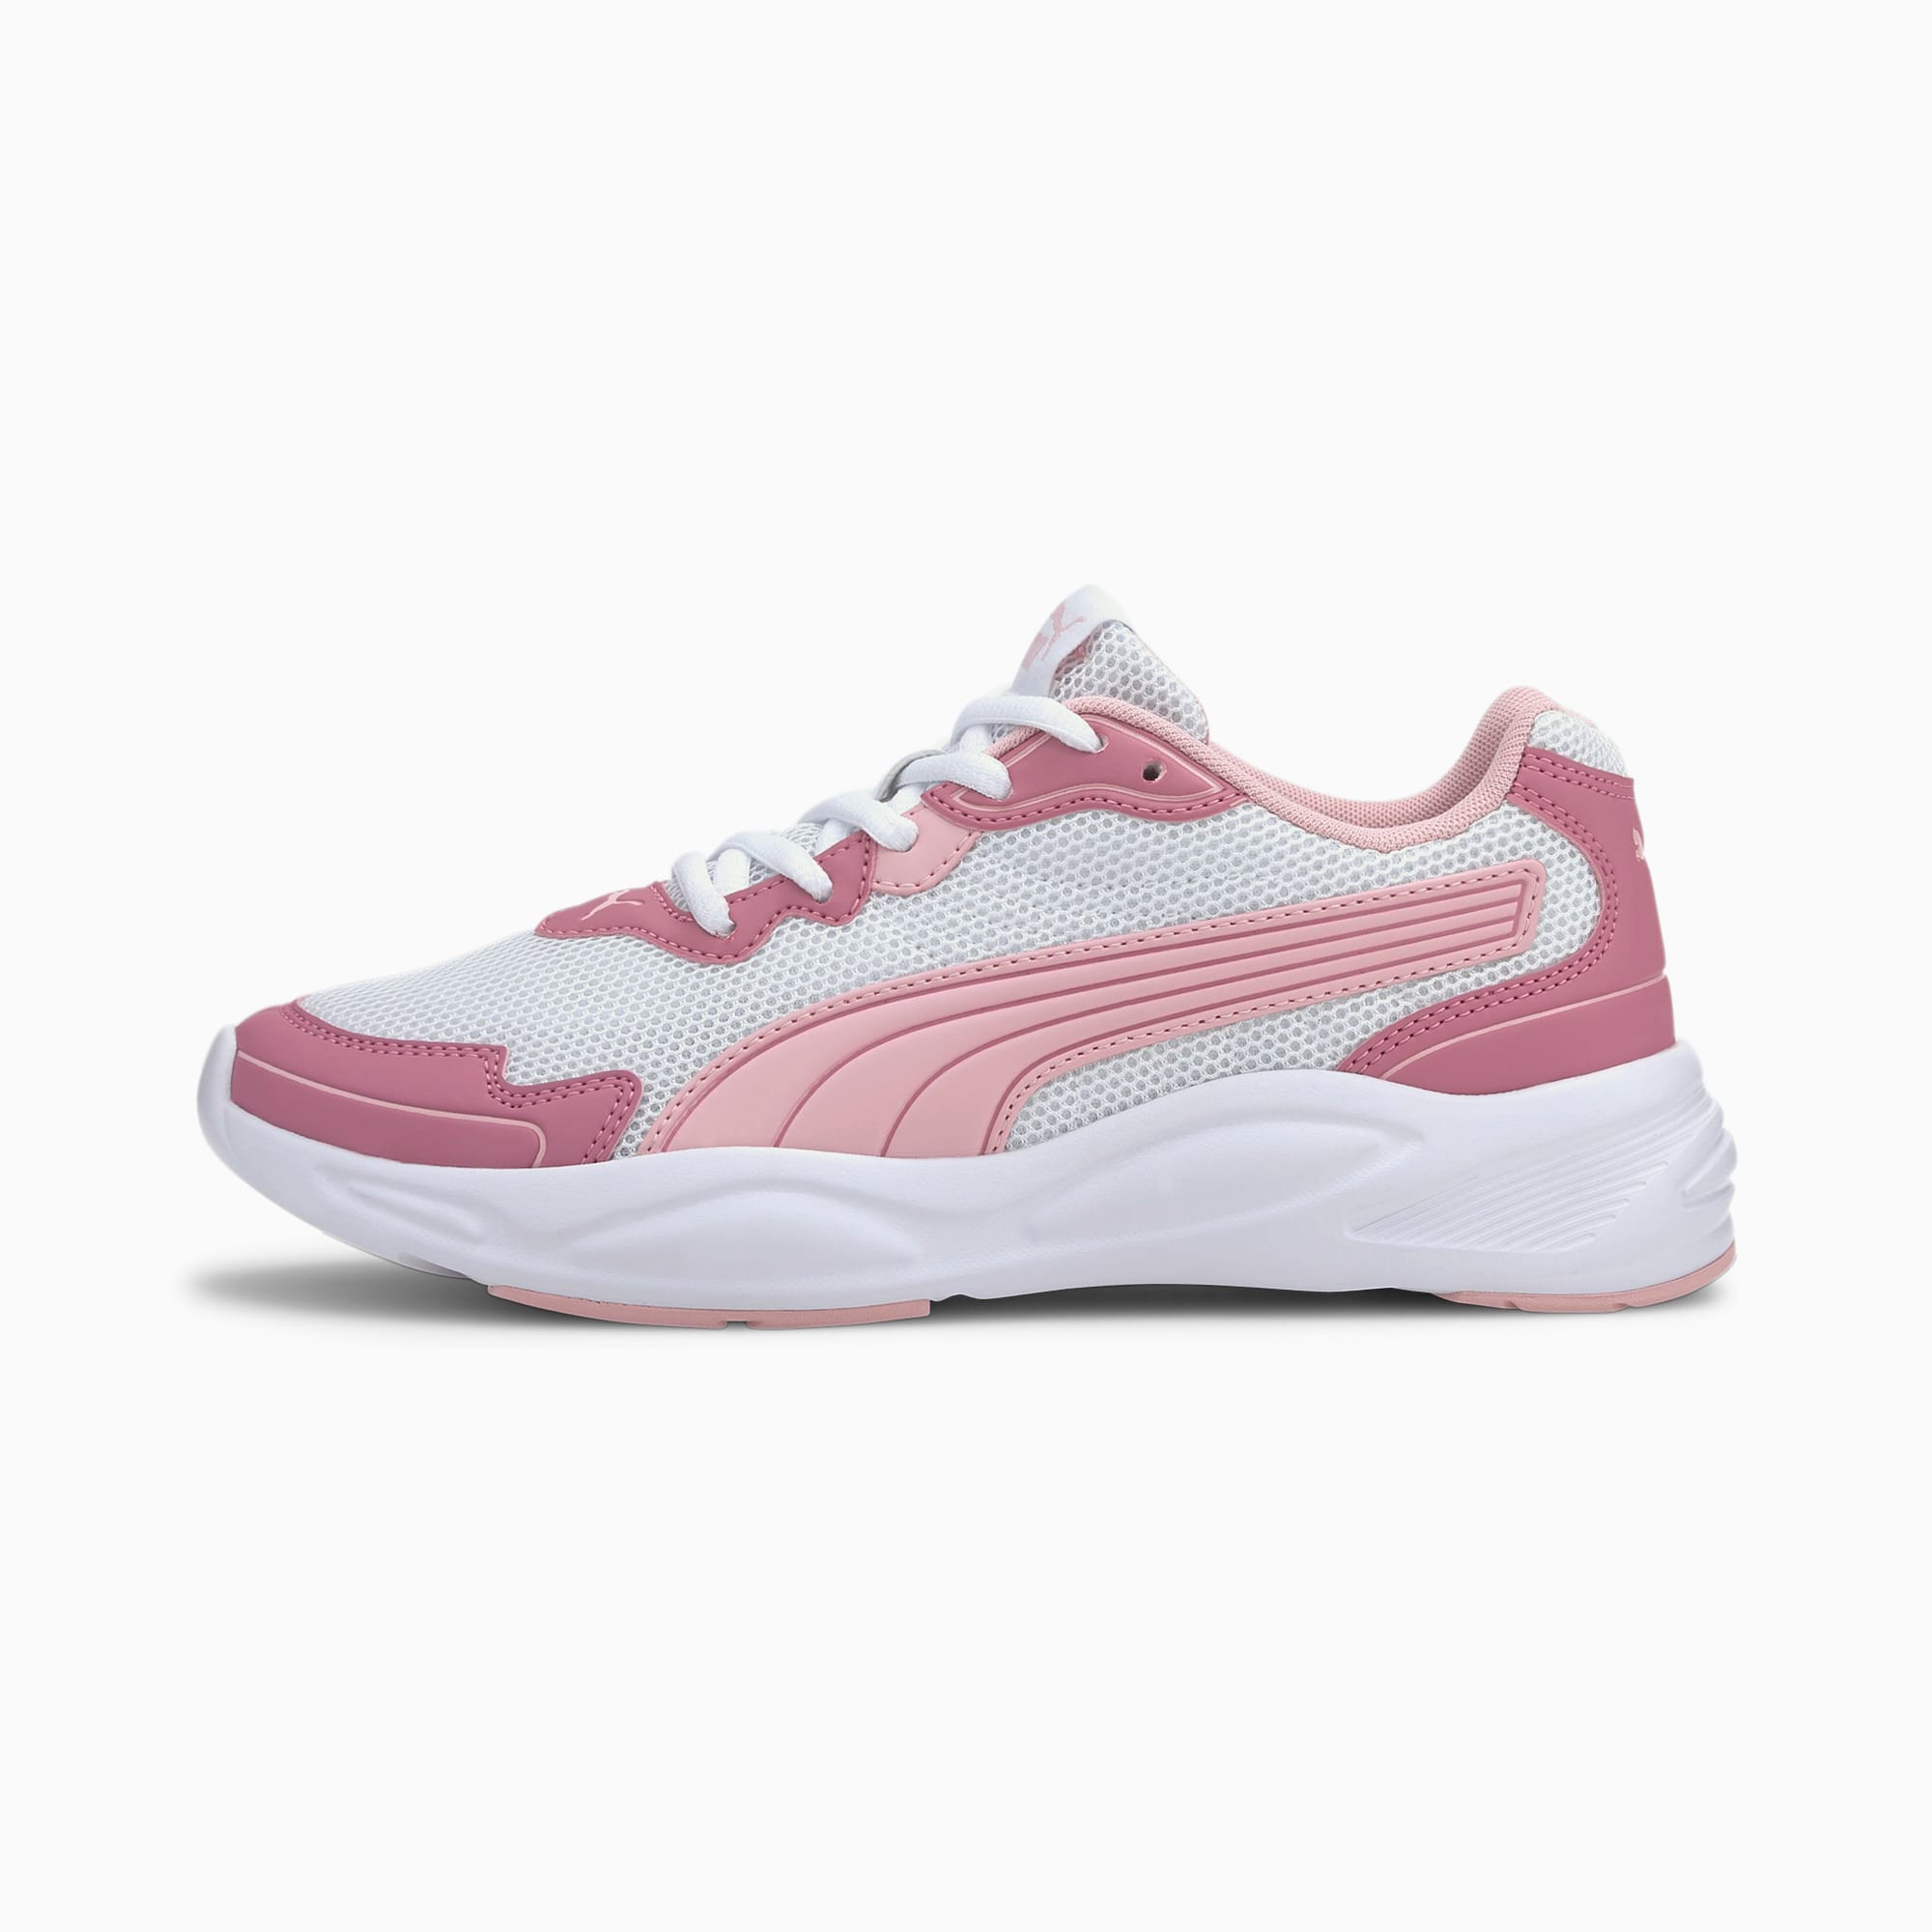 PUMA Chaussure Basket ‘90s Runner Nu Wave pour Homme, Blanc/Rose, Taille 37.5, Chaussures